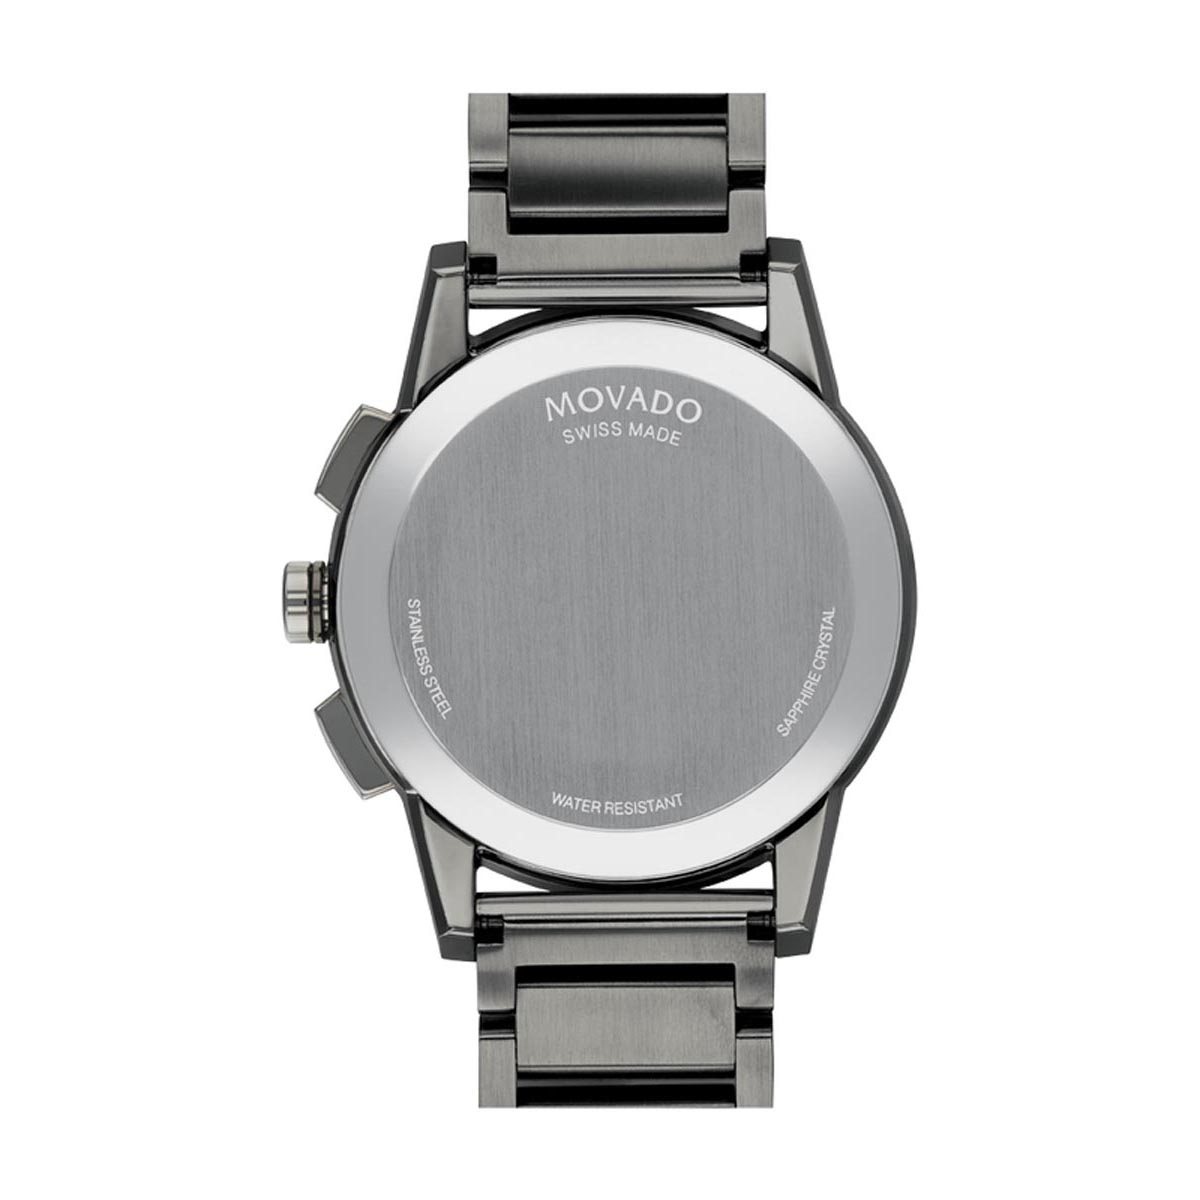 Mens Movado Museum Sport Watch with Black Dial and Gunmetal Ion Stainless Steel Bracelet (Swiss quartz movement)